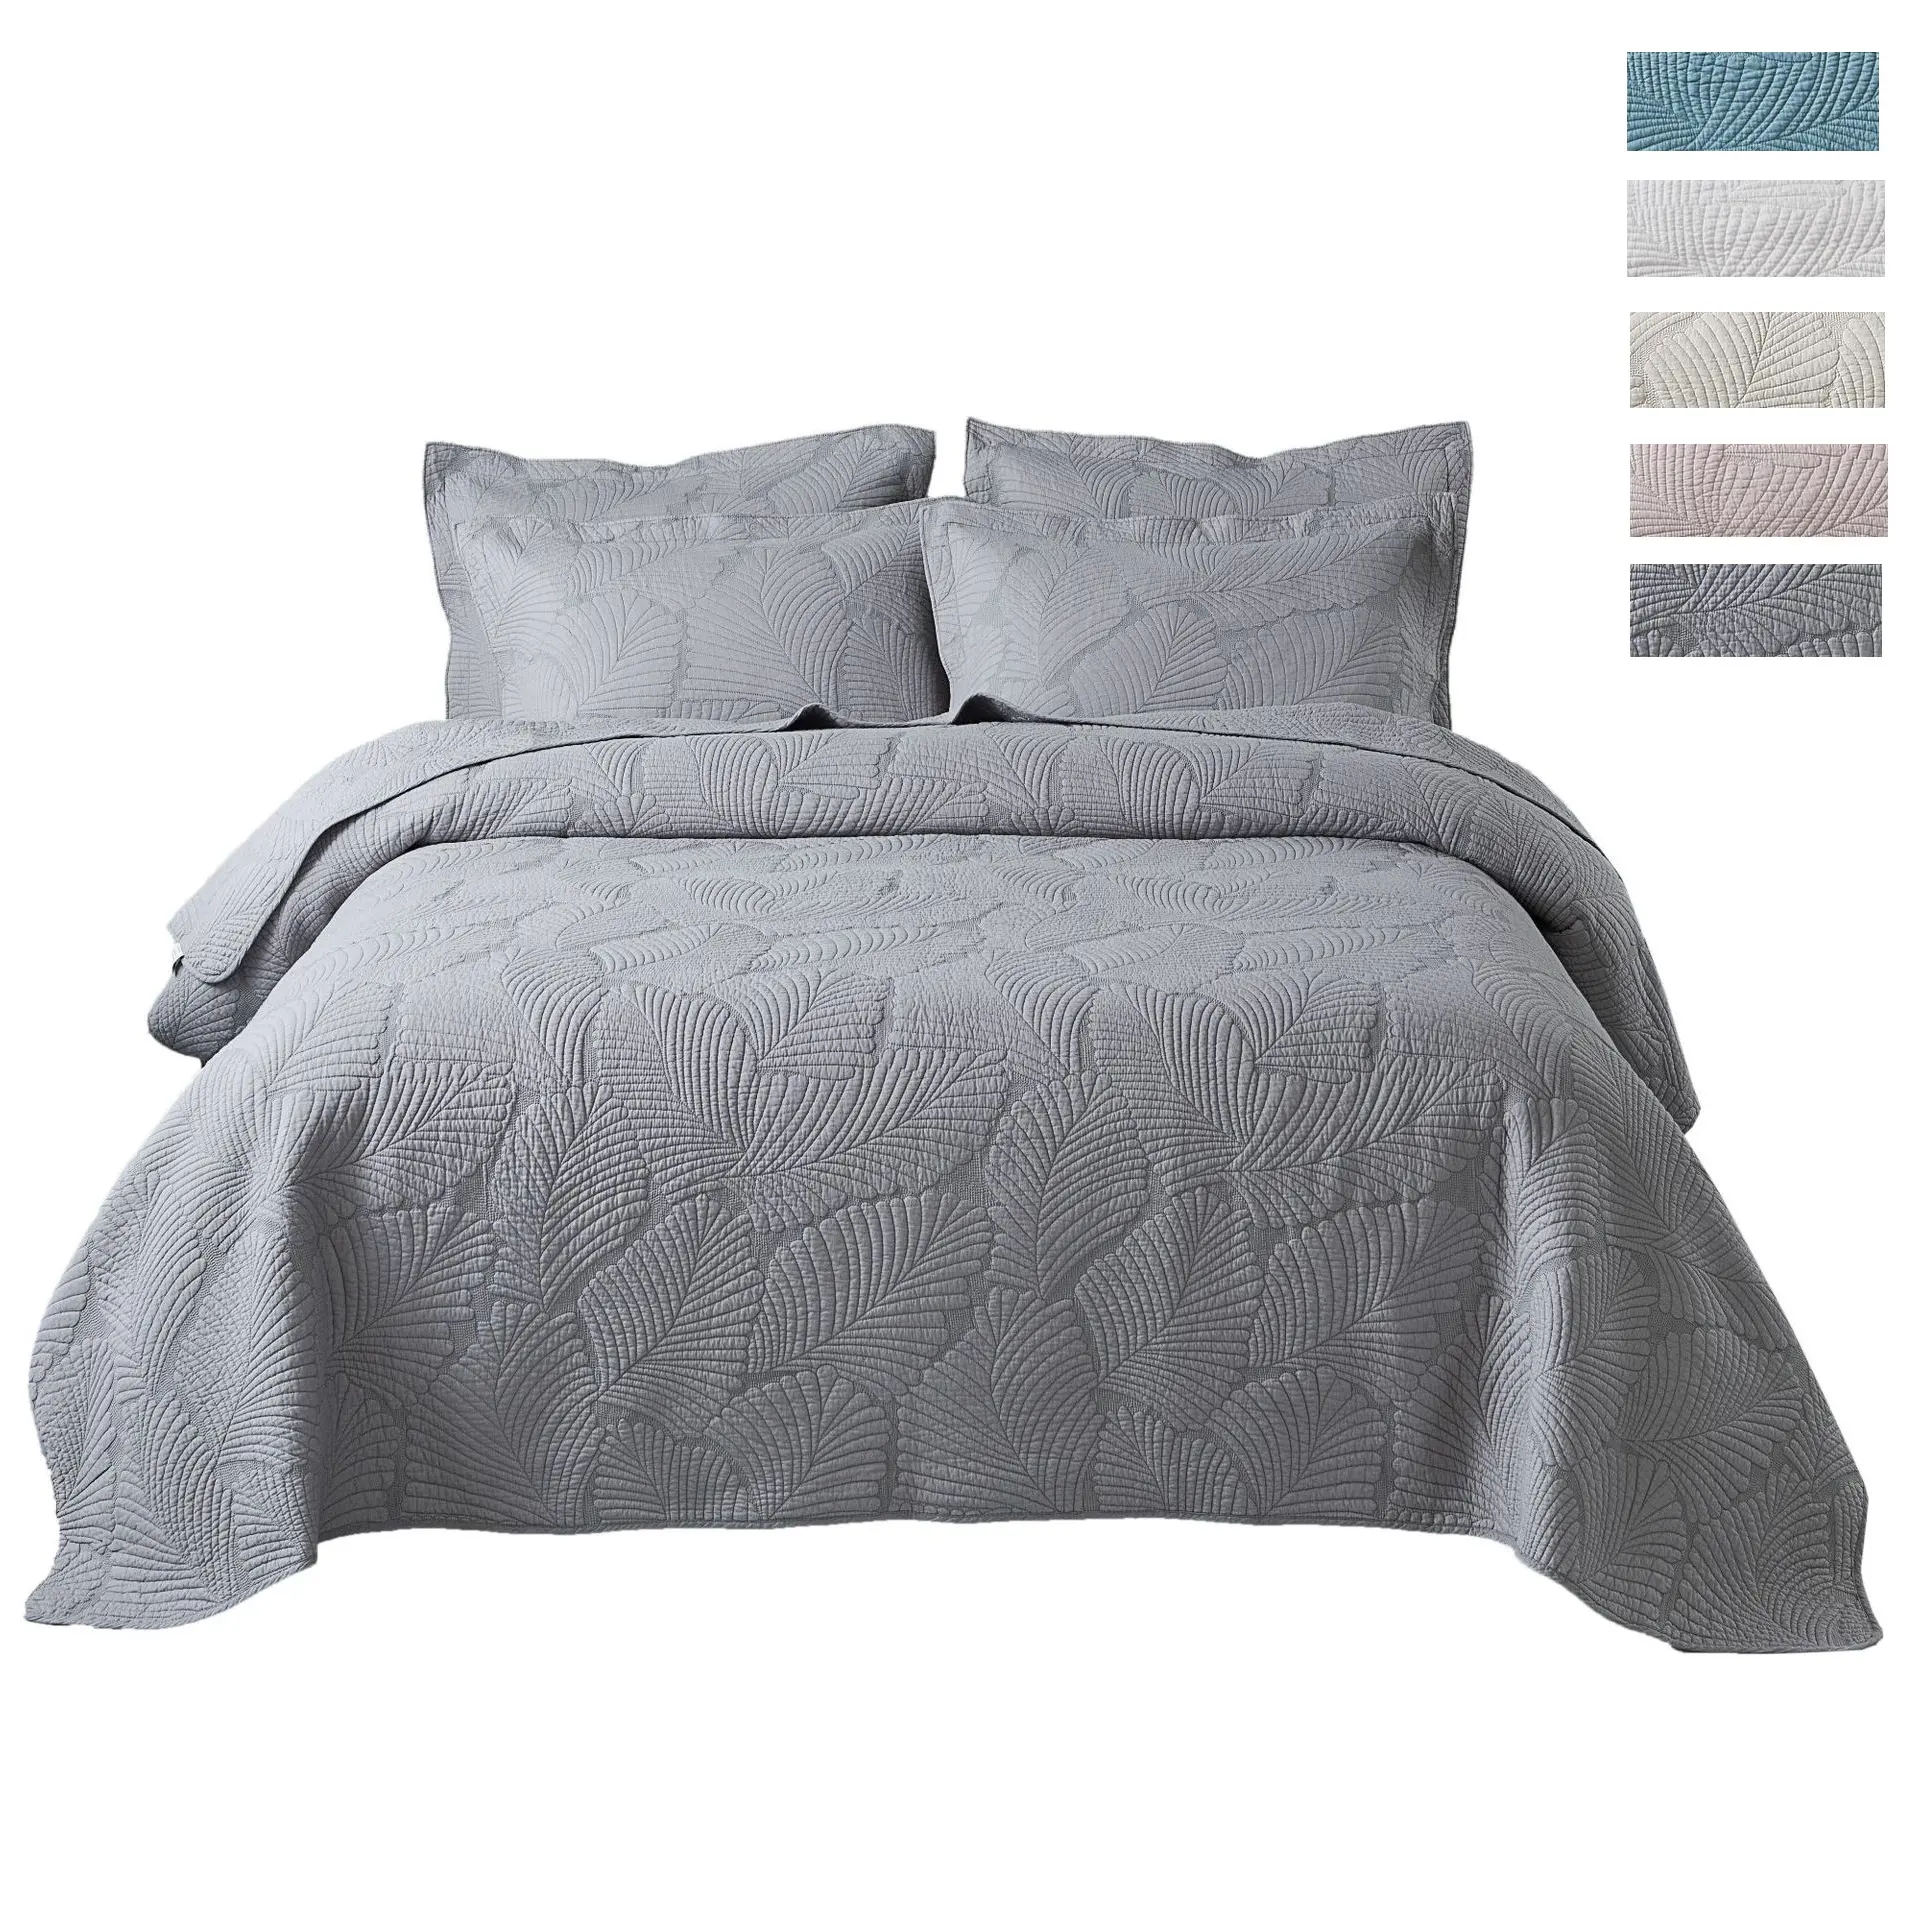 Waterproof Bedsheet Fabric Duvet Cover Cotton,Quilted Plain Bed Quilt Microfiber Fabric Cotton Bedspread